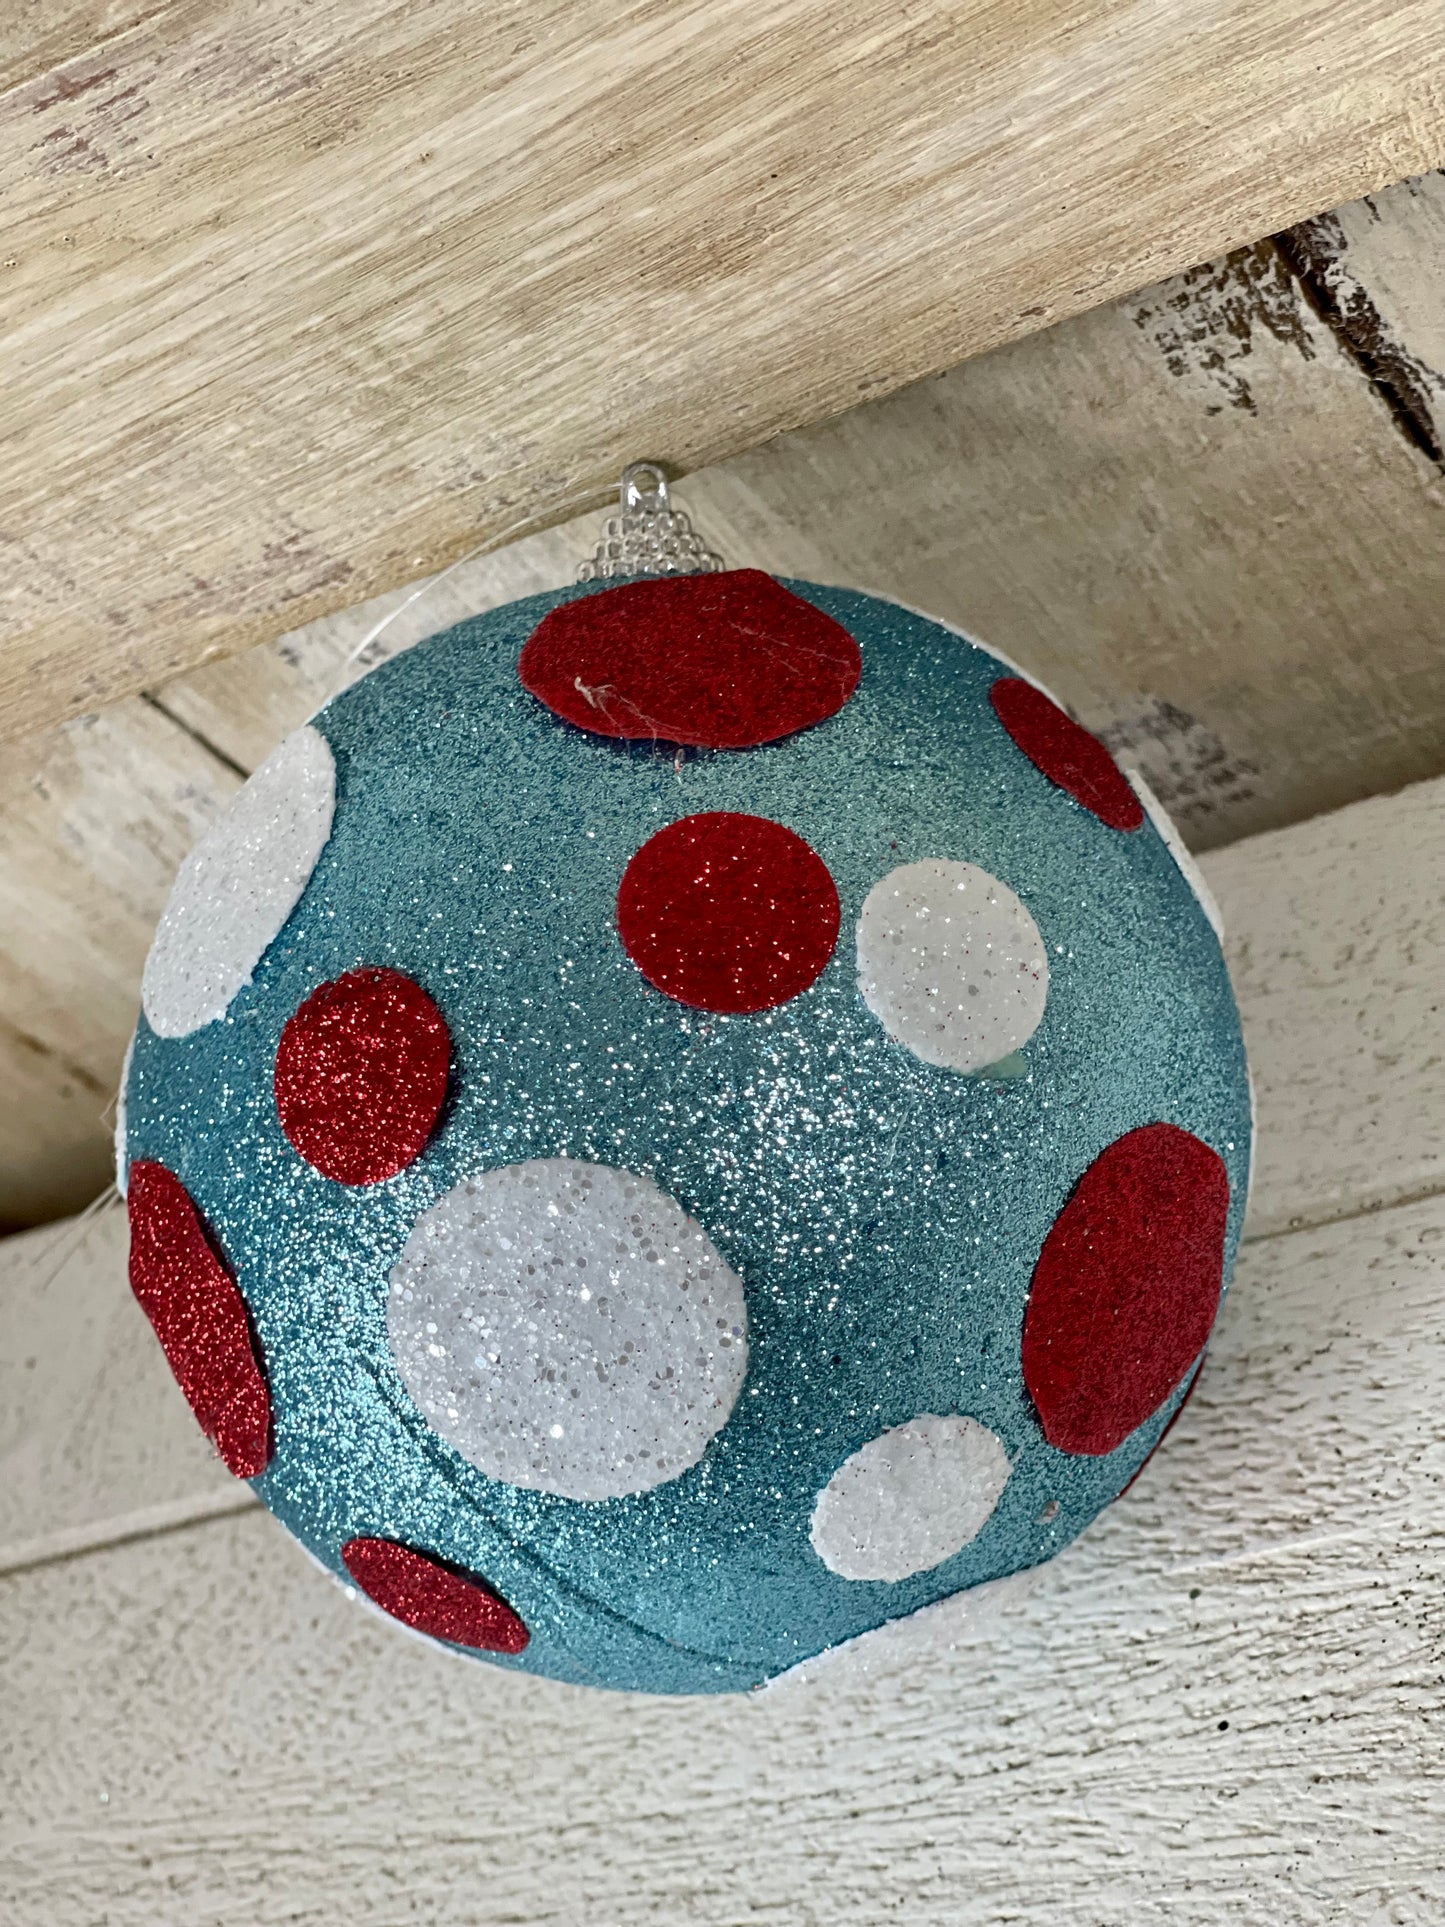 4.75 Inch Red White And Blue Polka Dot Ornament Ball